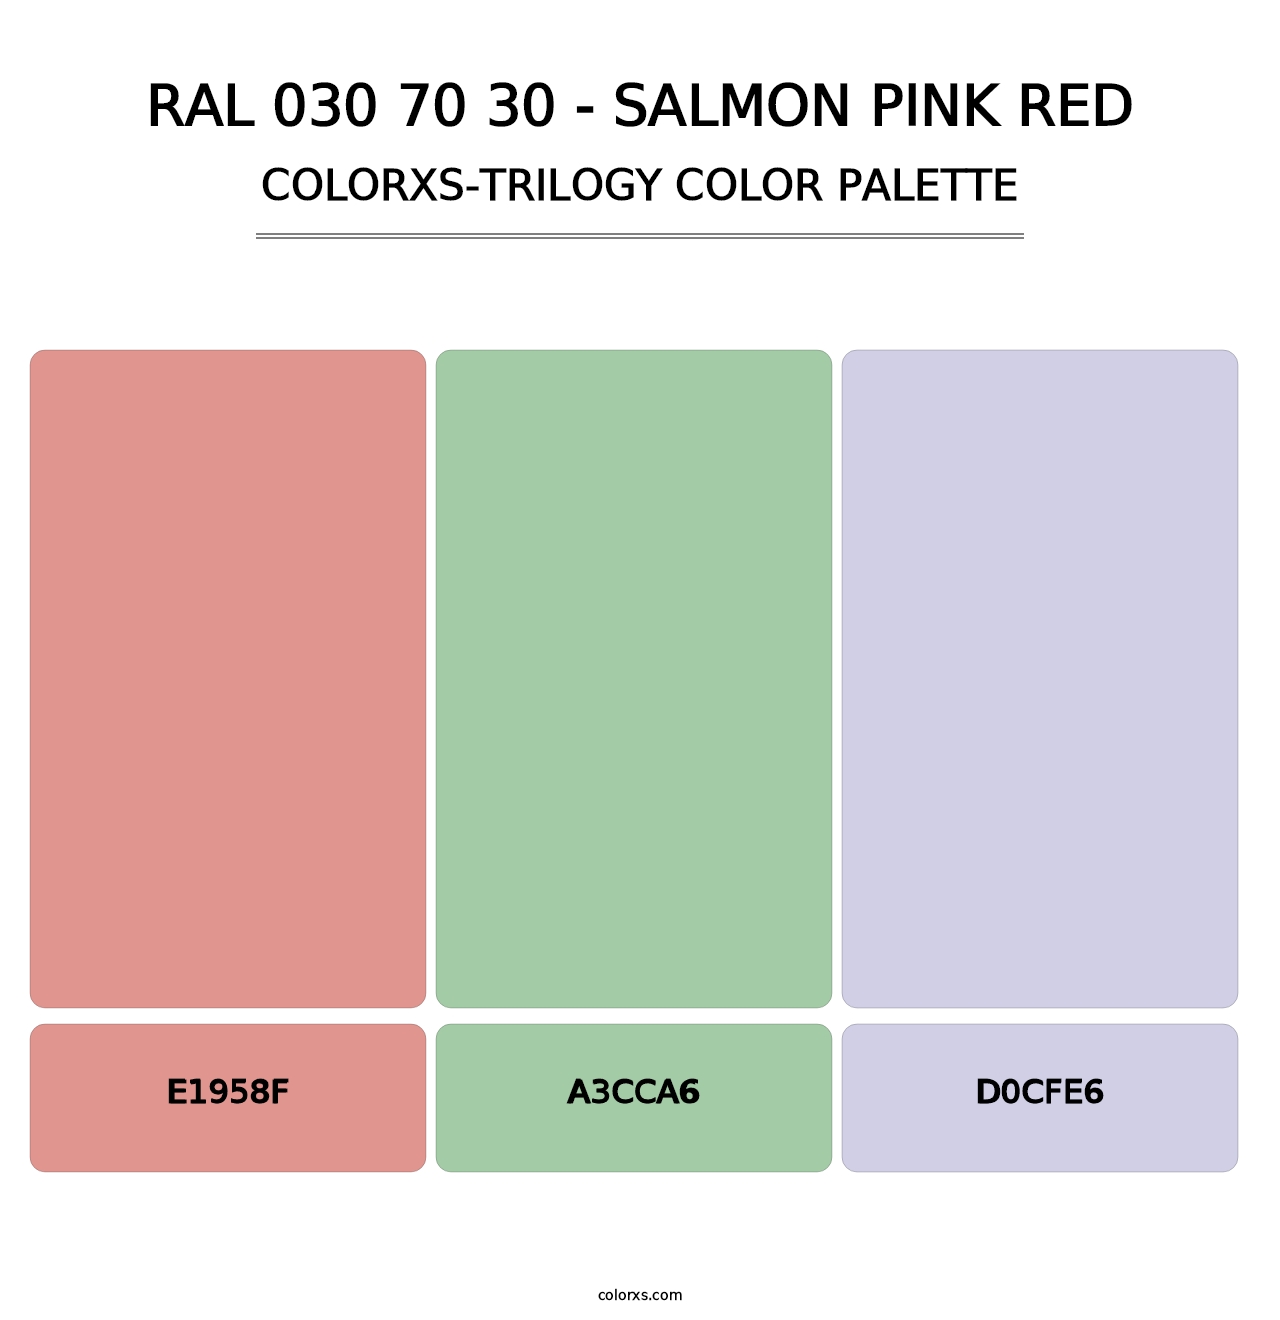 RAL 030 70 30 - Salmon Pink Red - Colorxs Trilogy Palette